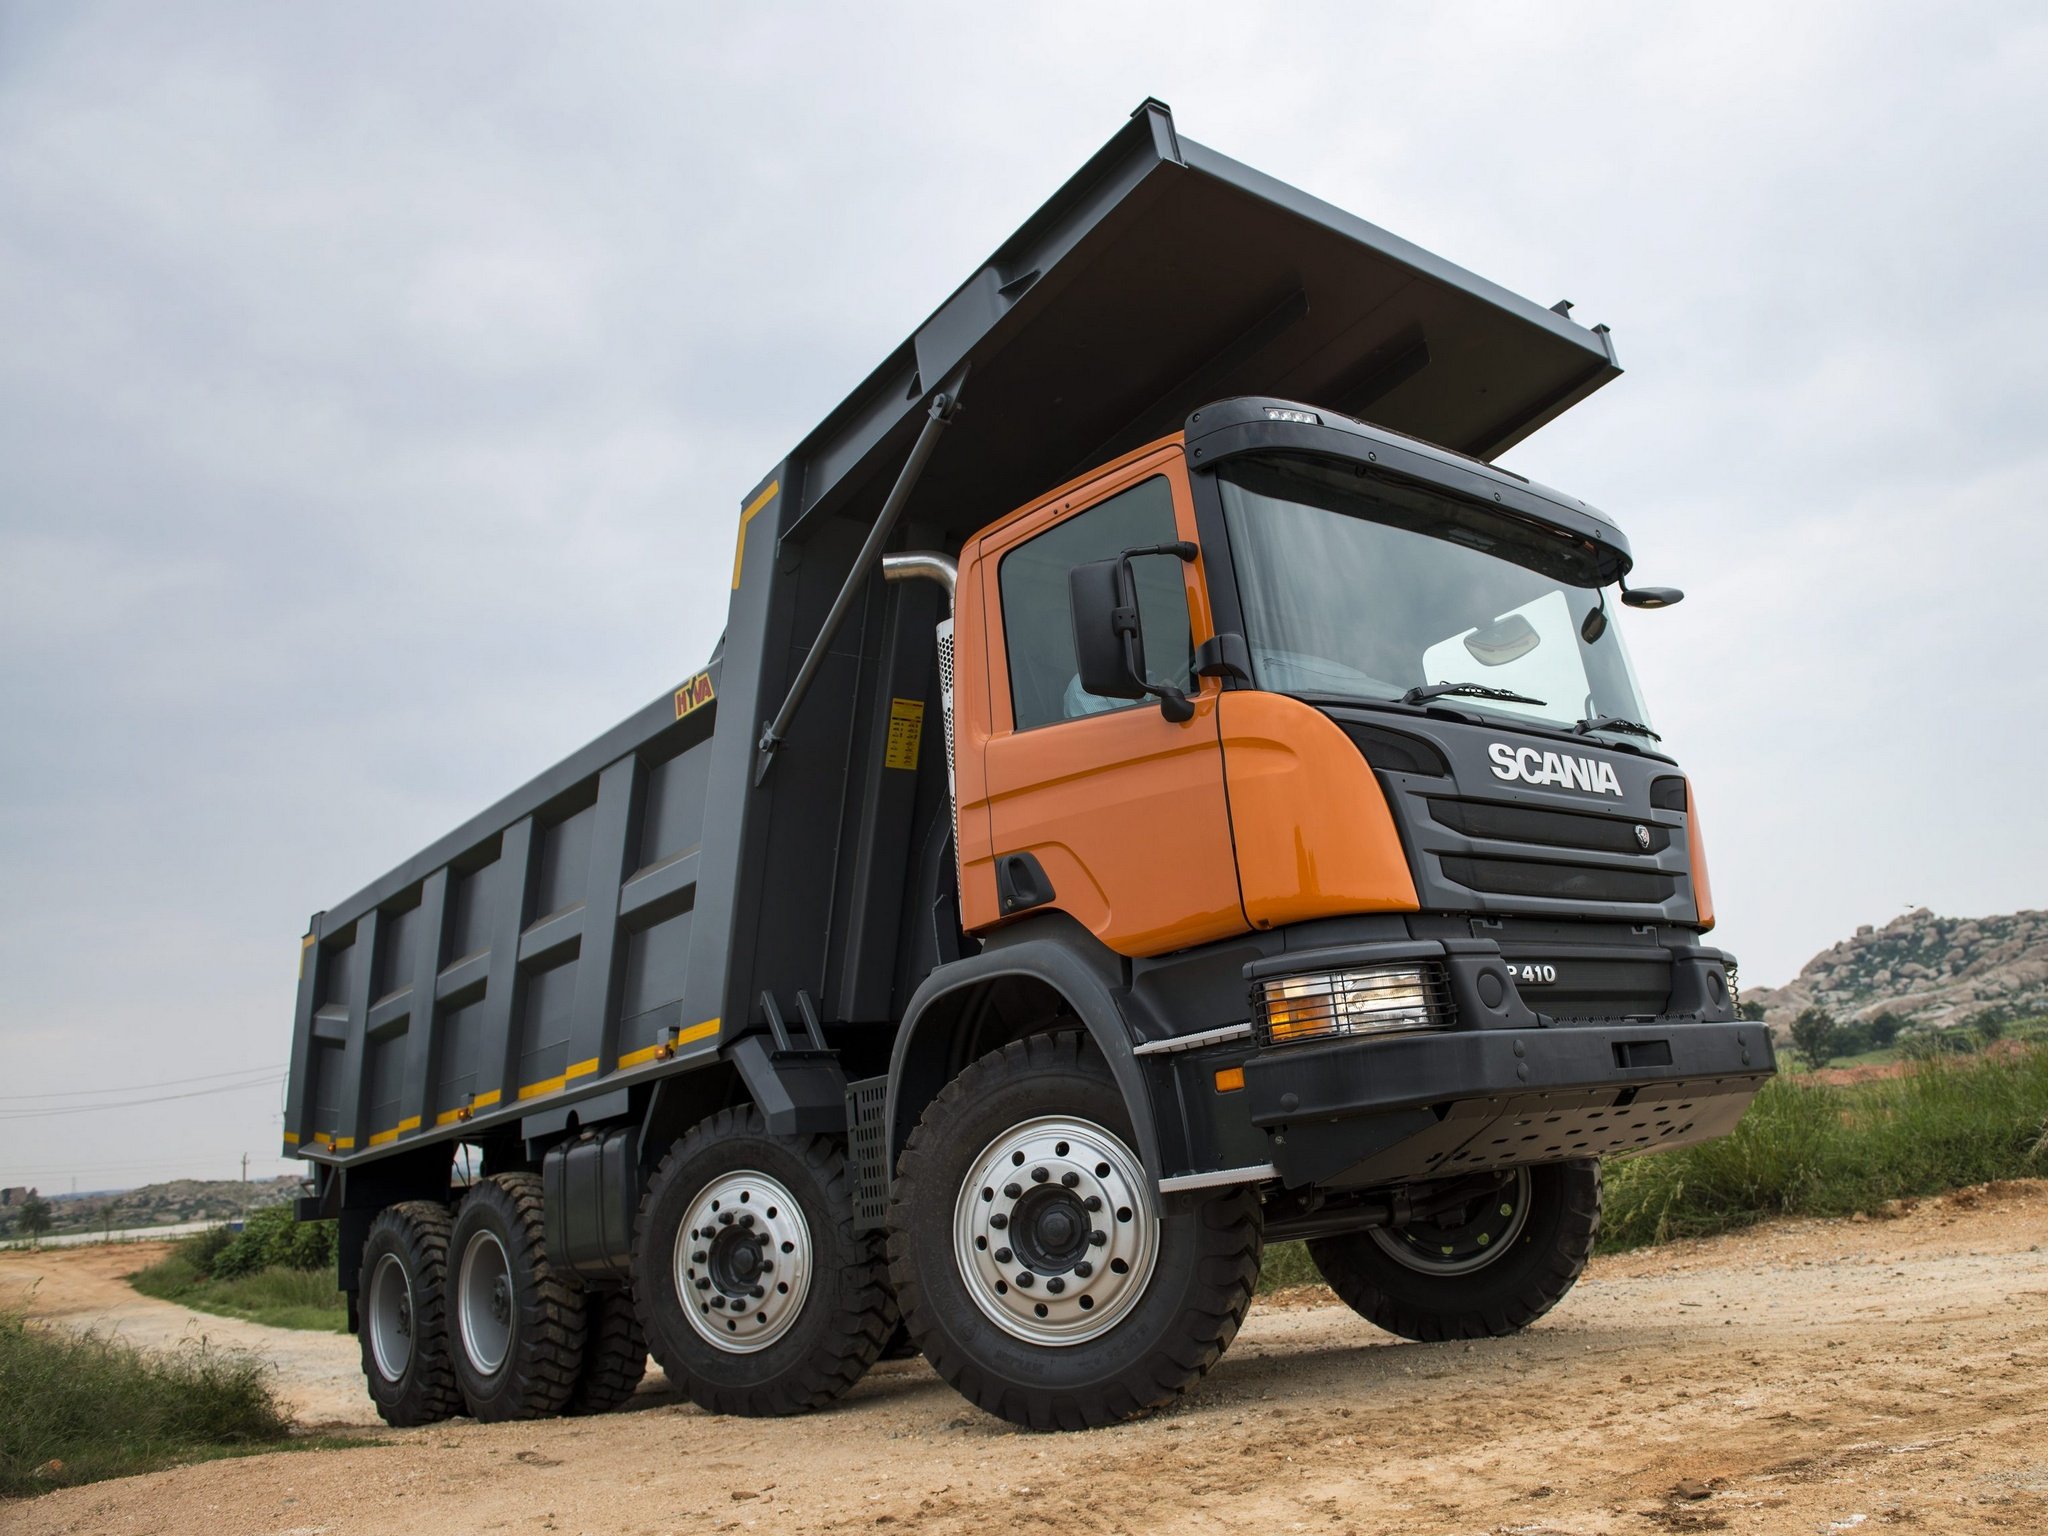 Choosing the right dump truck for construction and cargo transportation in Israel